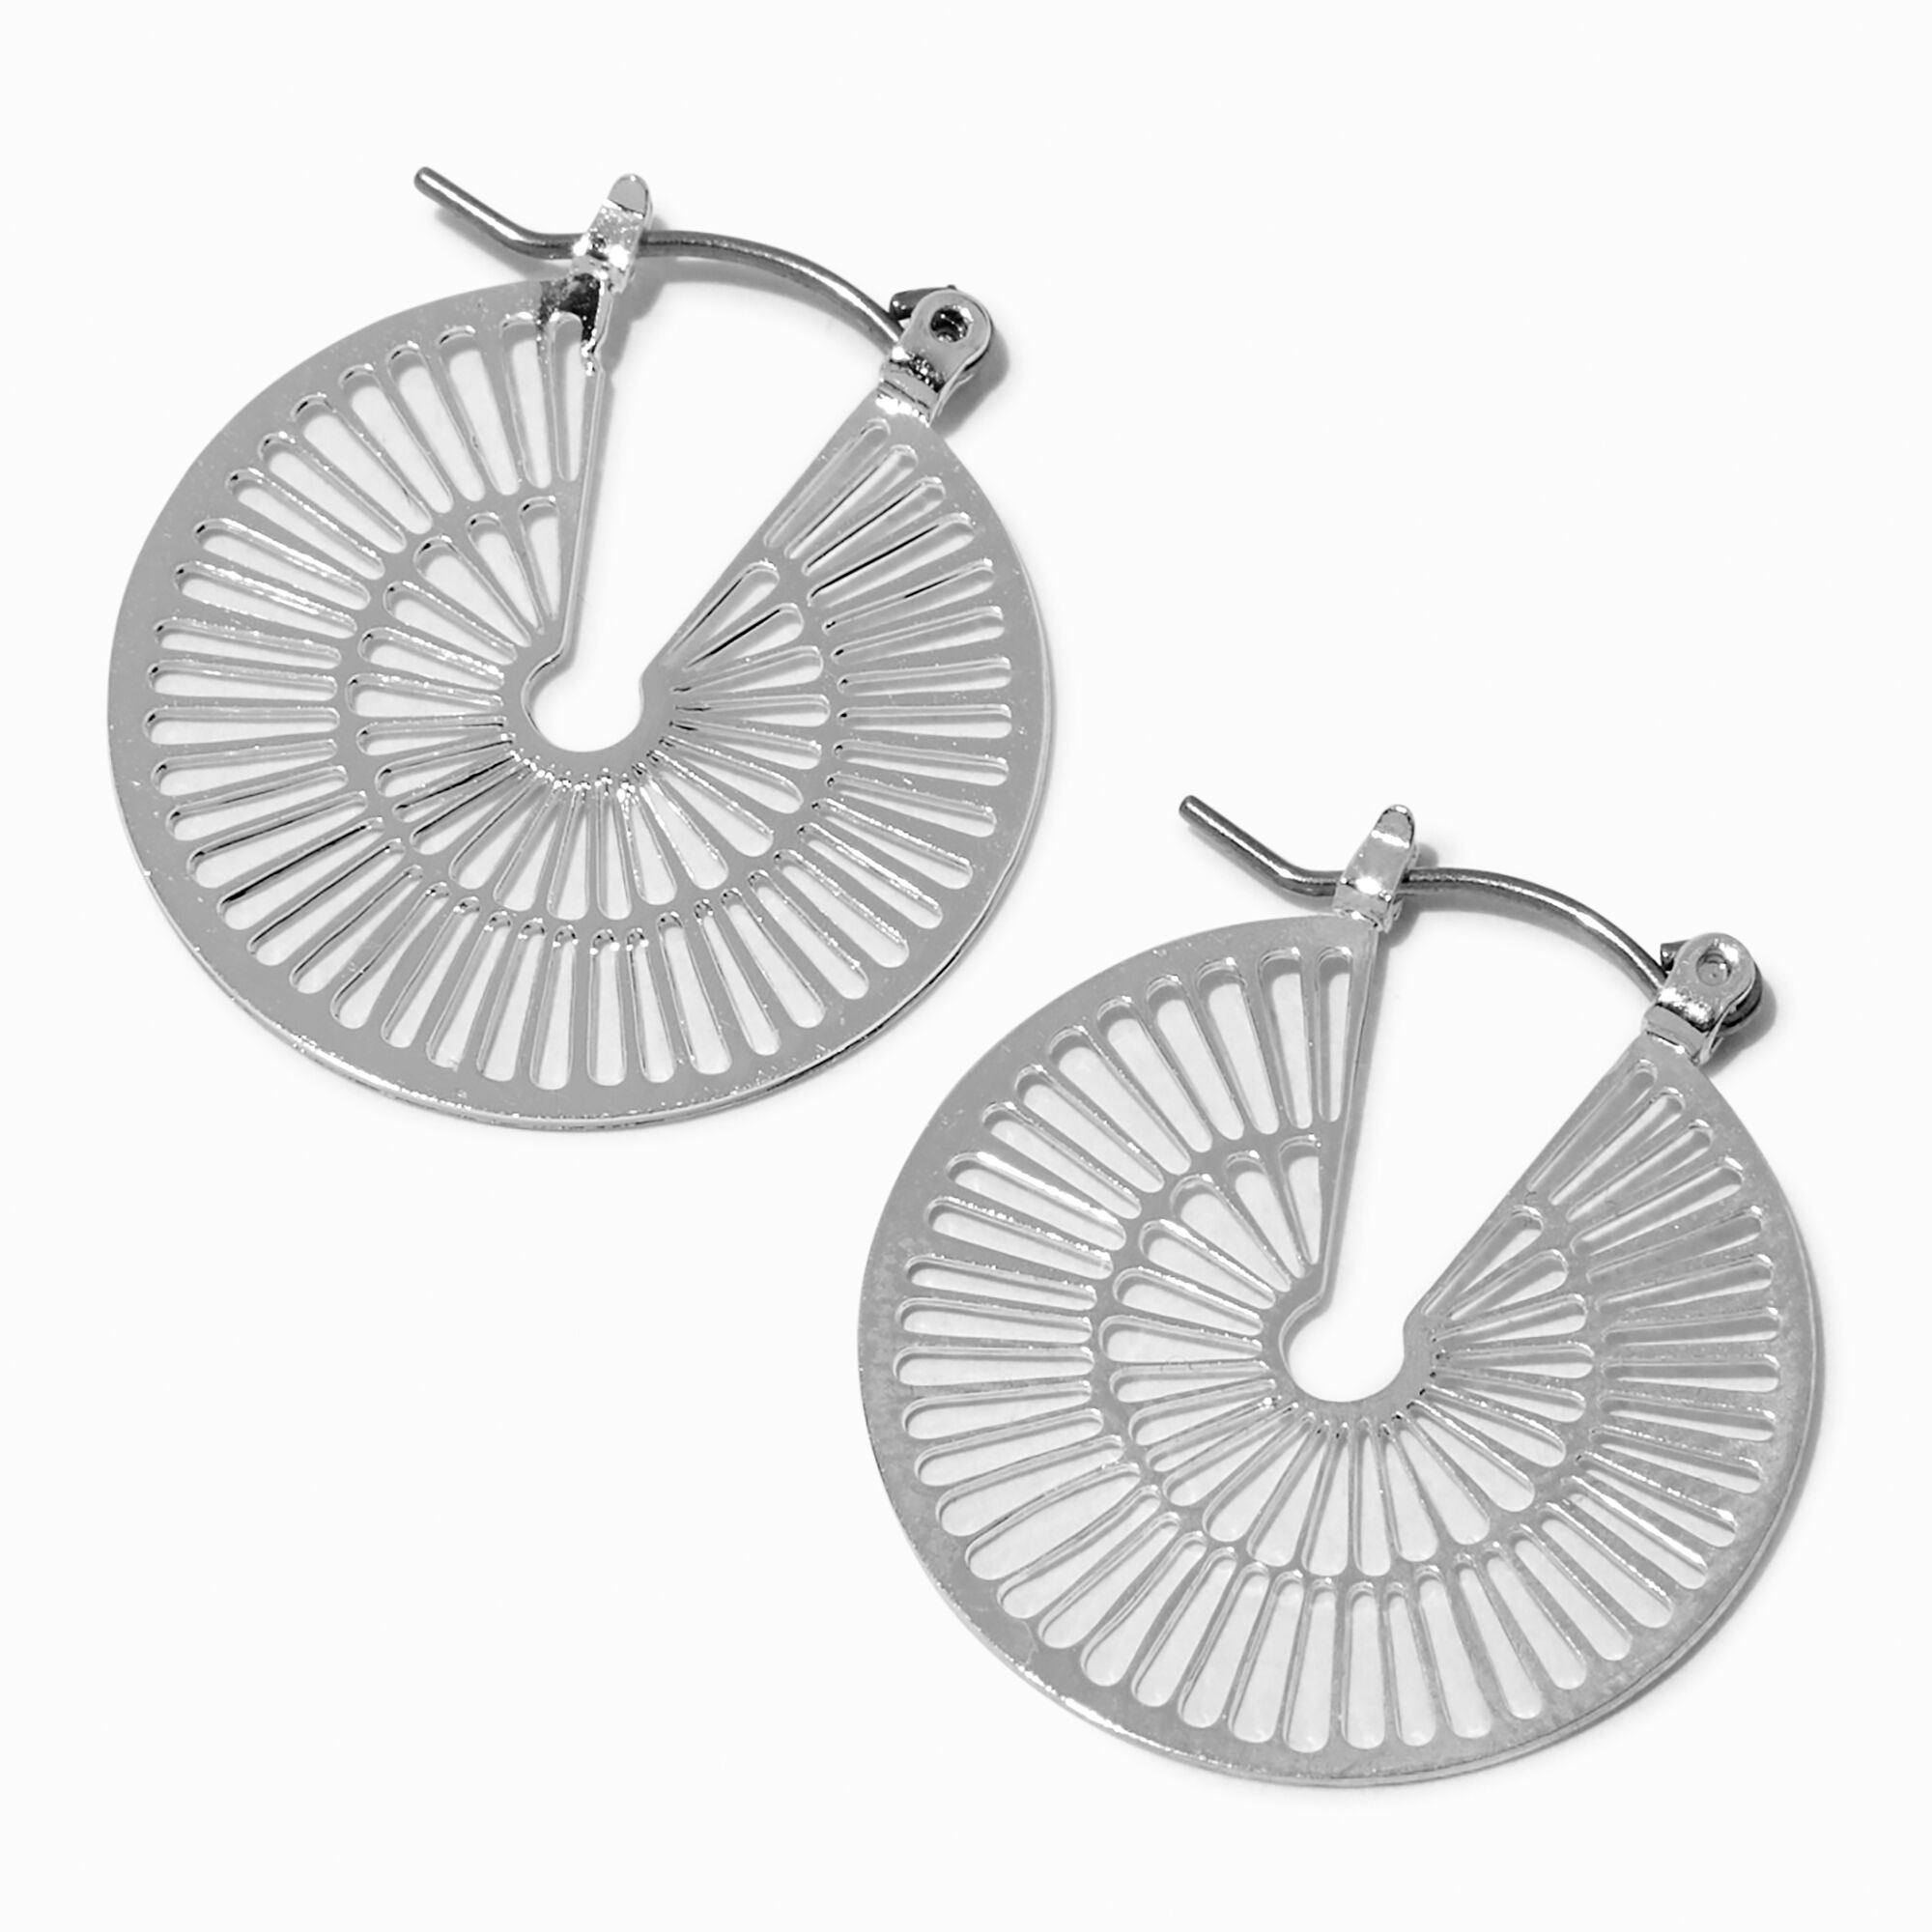 View Claires Tone 40MM Laser Cut Hoop Earrings Silver information